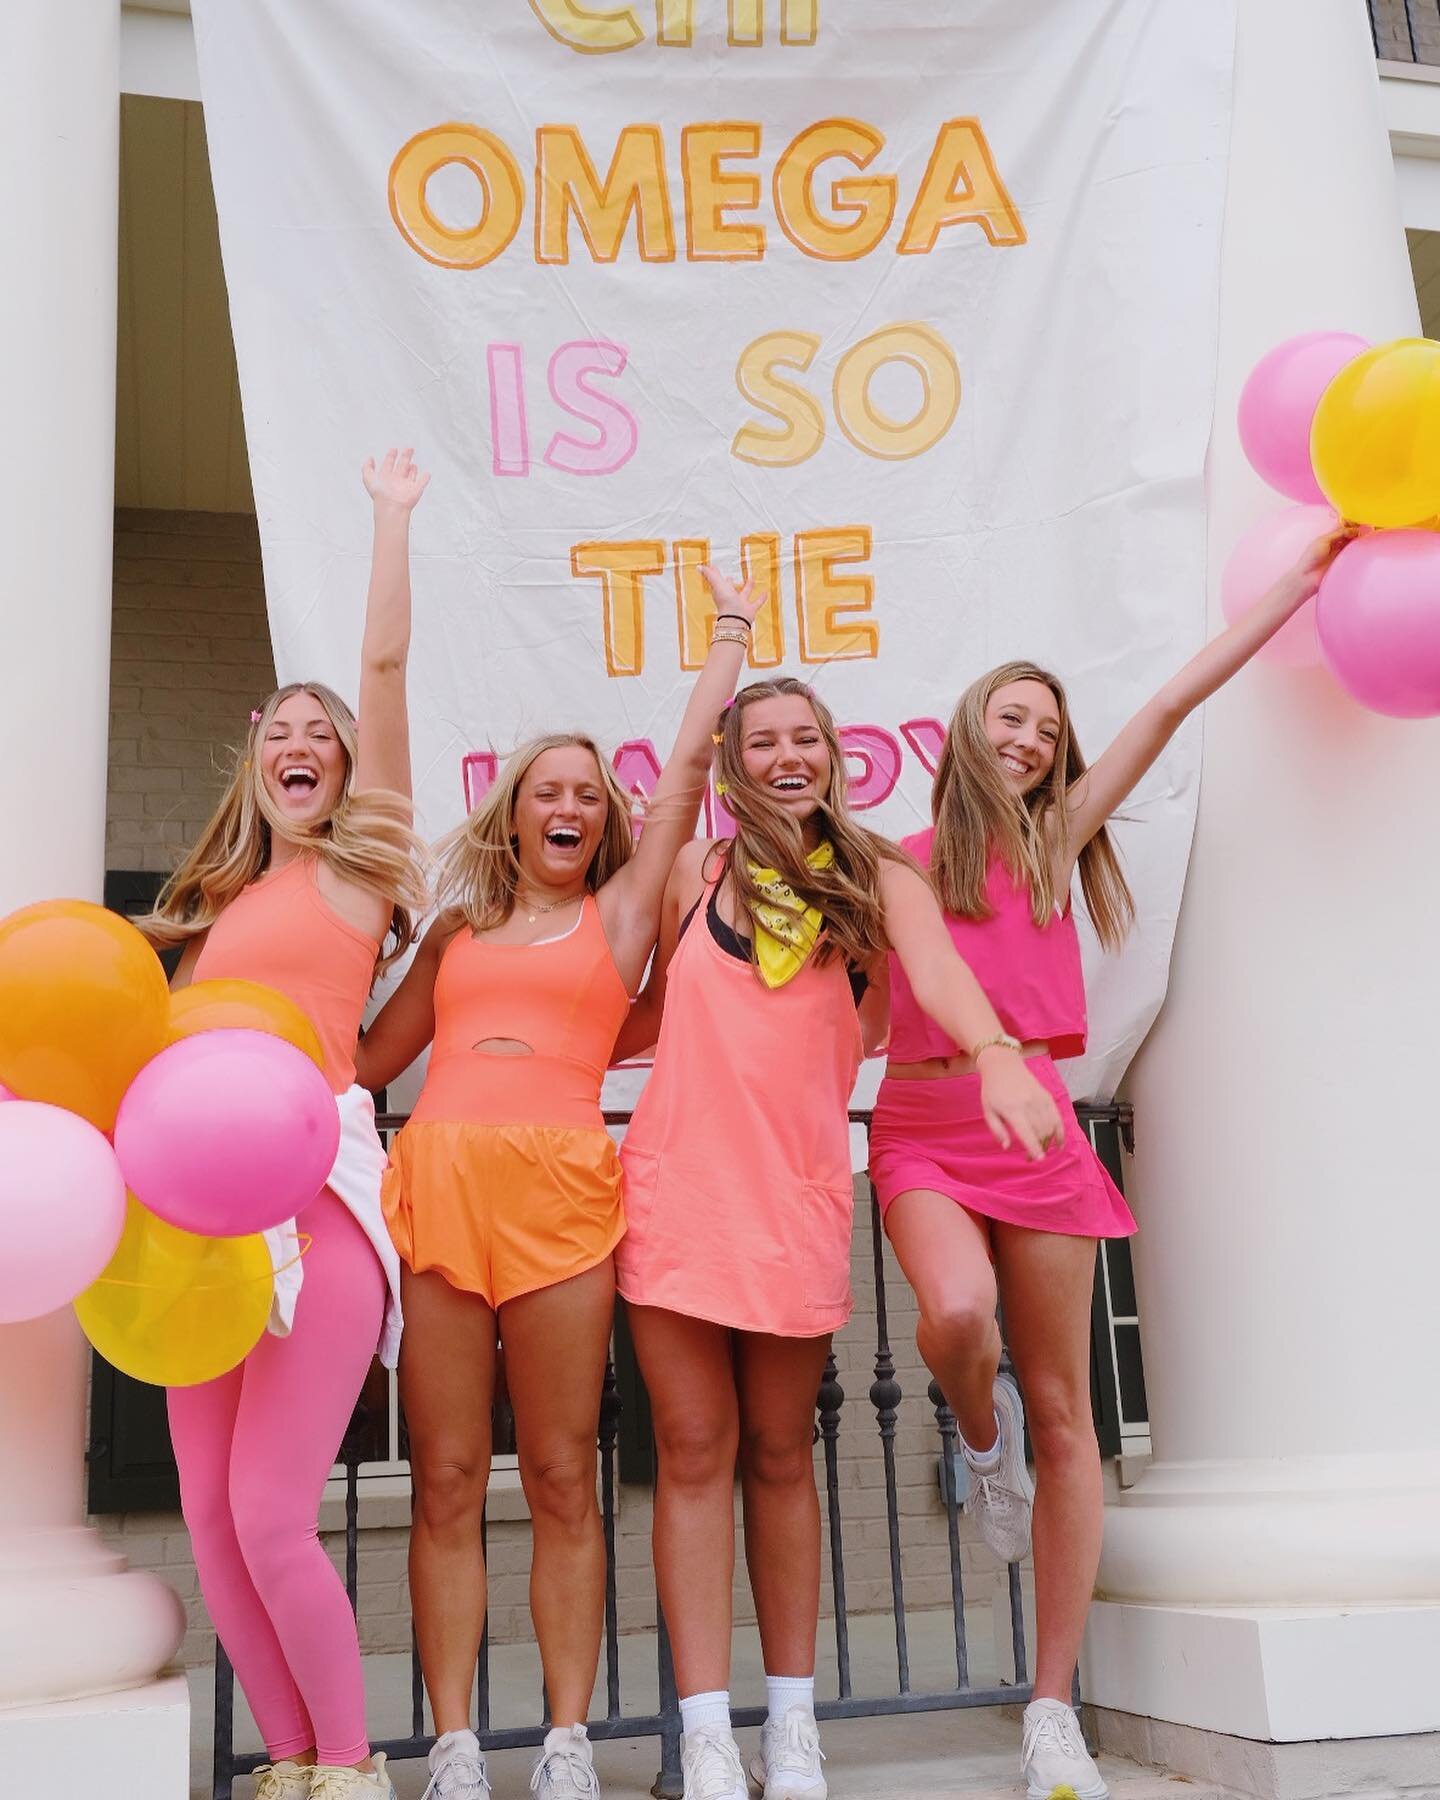 thiiiiiiis excited for PC &lsquo;24💖🧡💛!!!!!

CHI O IS SO THE HAPPY PLACE!

#XO PhiDeltaLovesYou #ChiOmega